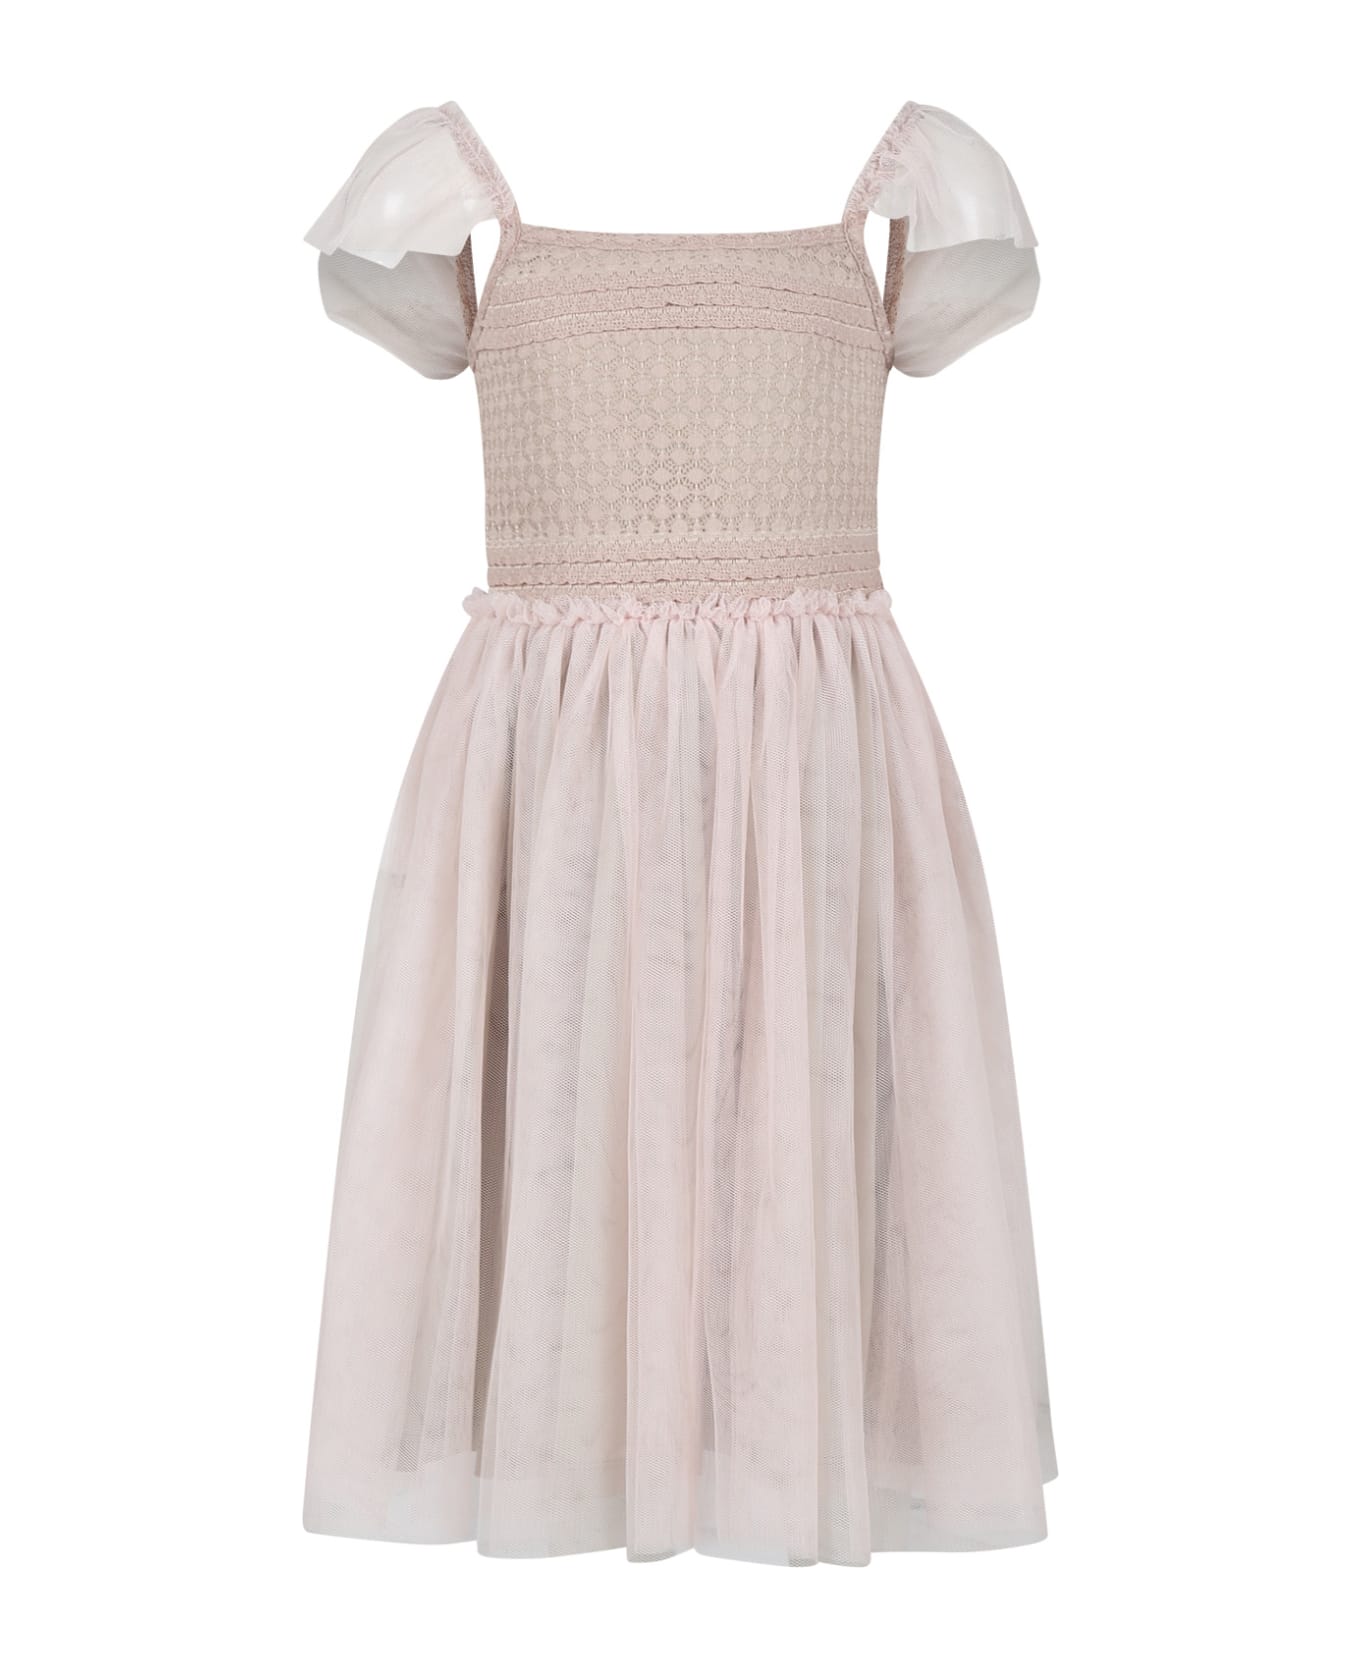 Caffe' d'Orzo Elegant Pink Tulle Dress - Pink